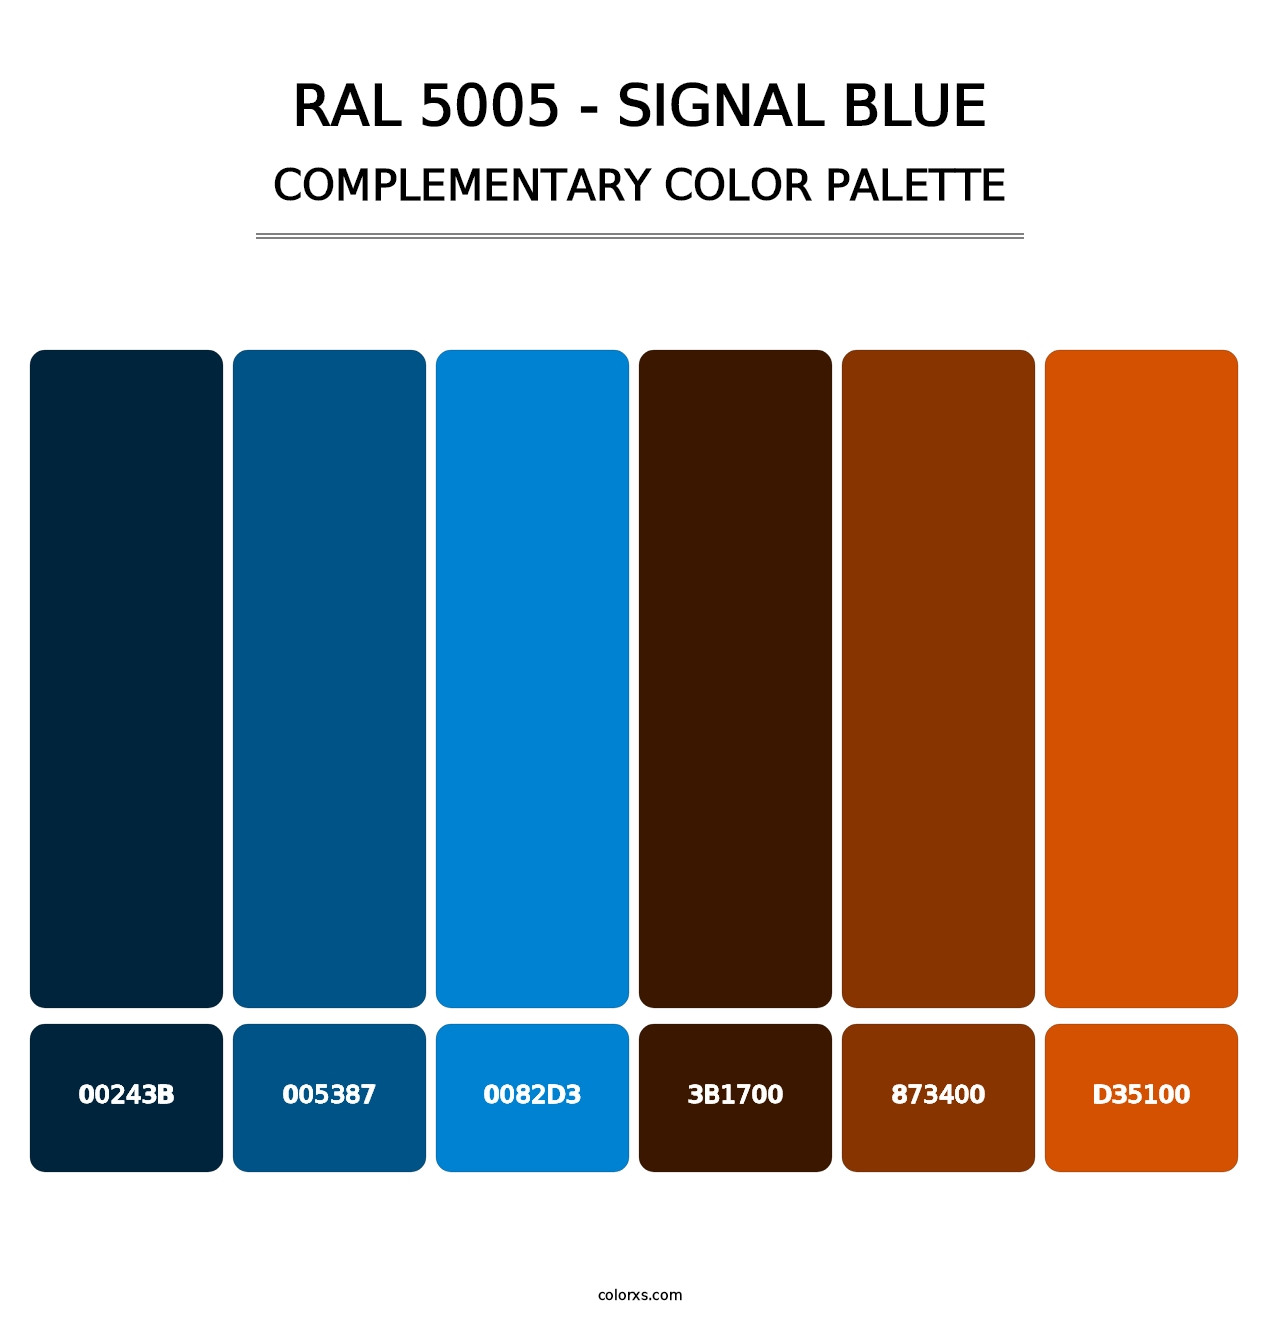 RAL 5005 - Signal Blue - Complementary Color Palette